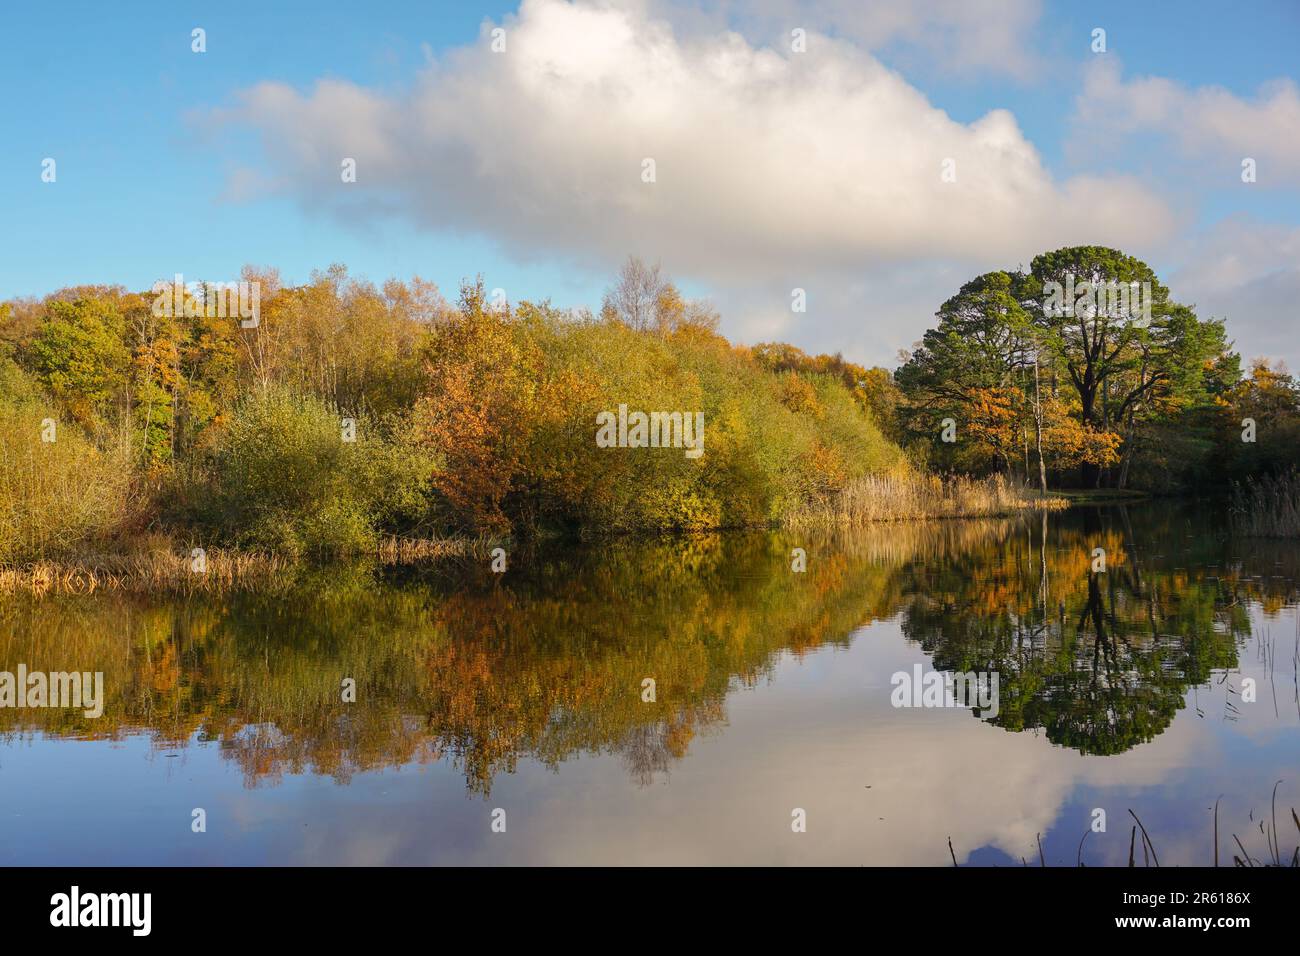 Scenic view over picturesque lake and parkland. Autumn day with tree reflection in calm lake water Stock Photo